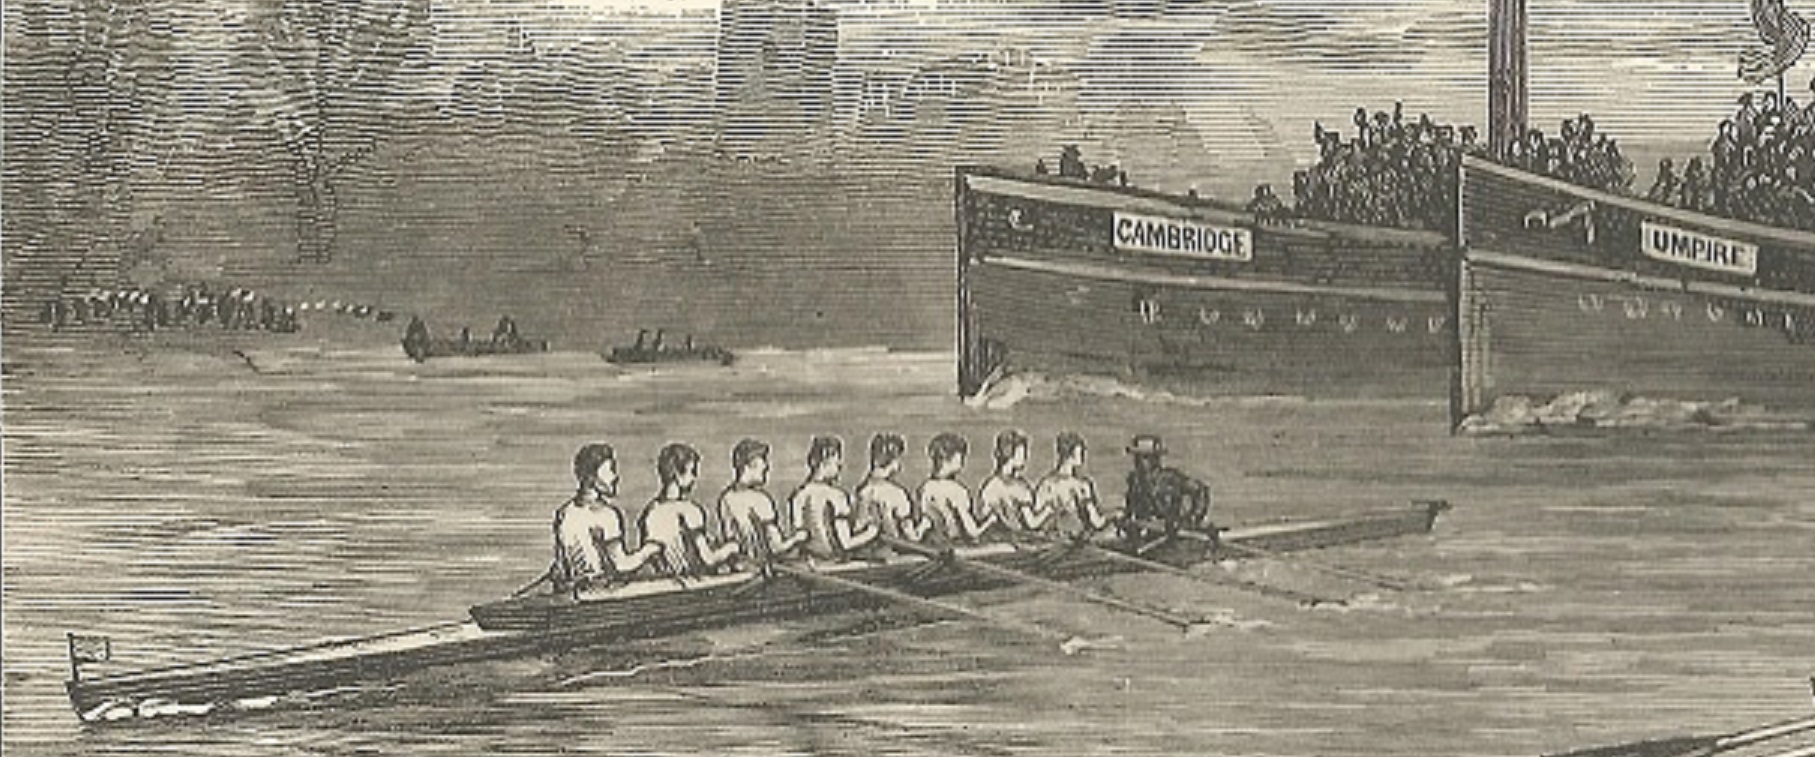 Print GBR 1882 Boat Race Oxford begins to lead The Illustrated London News Cambridge on Berkshire shore